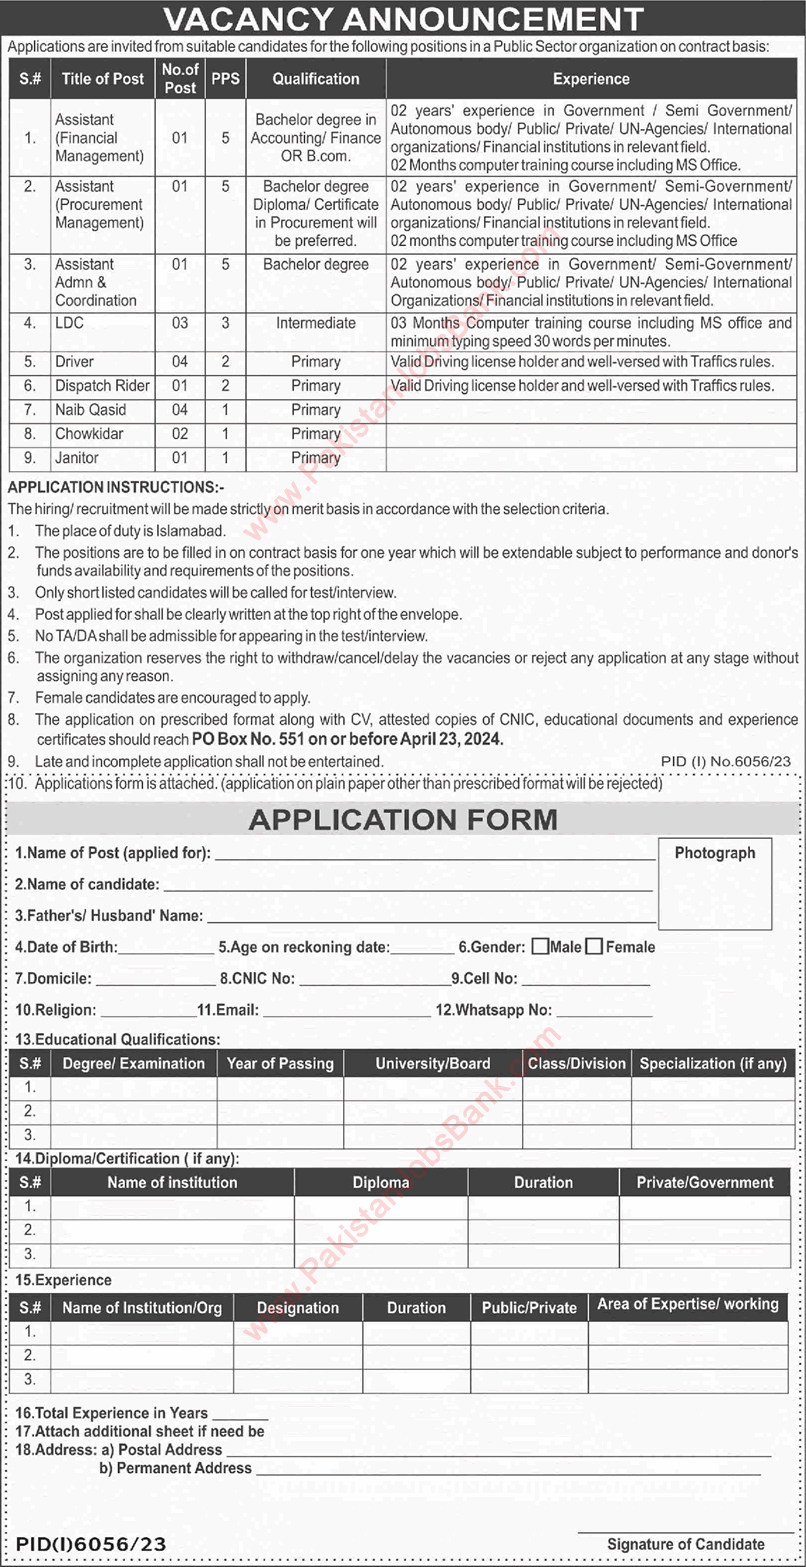 PO Box 551 Islamabad Jobs 2024 April Clerks, Drivers & Others Public Sector Organization Latest